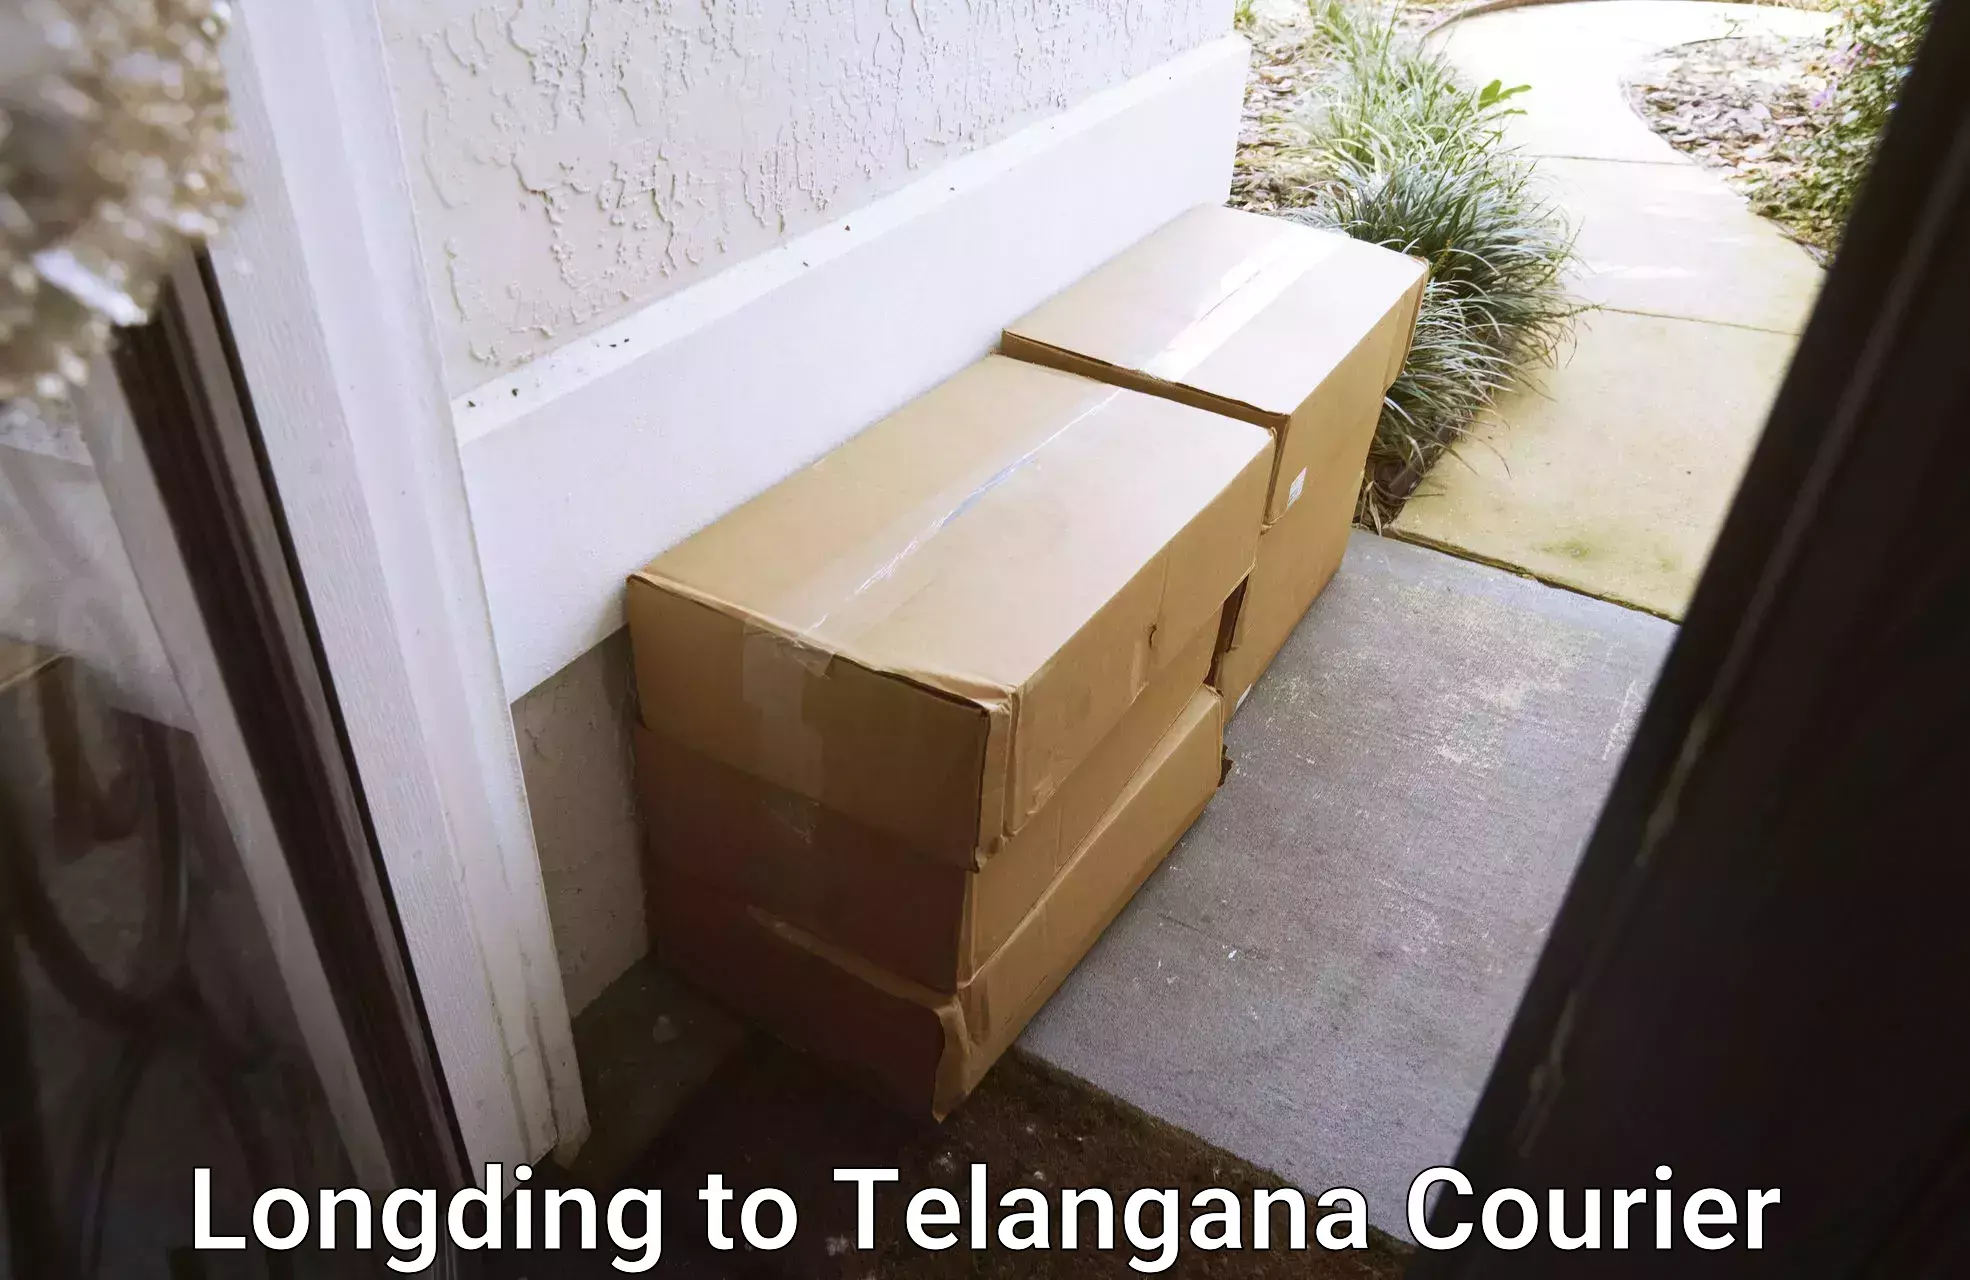 Delivery service partnership in Longding to Telangana